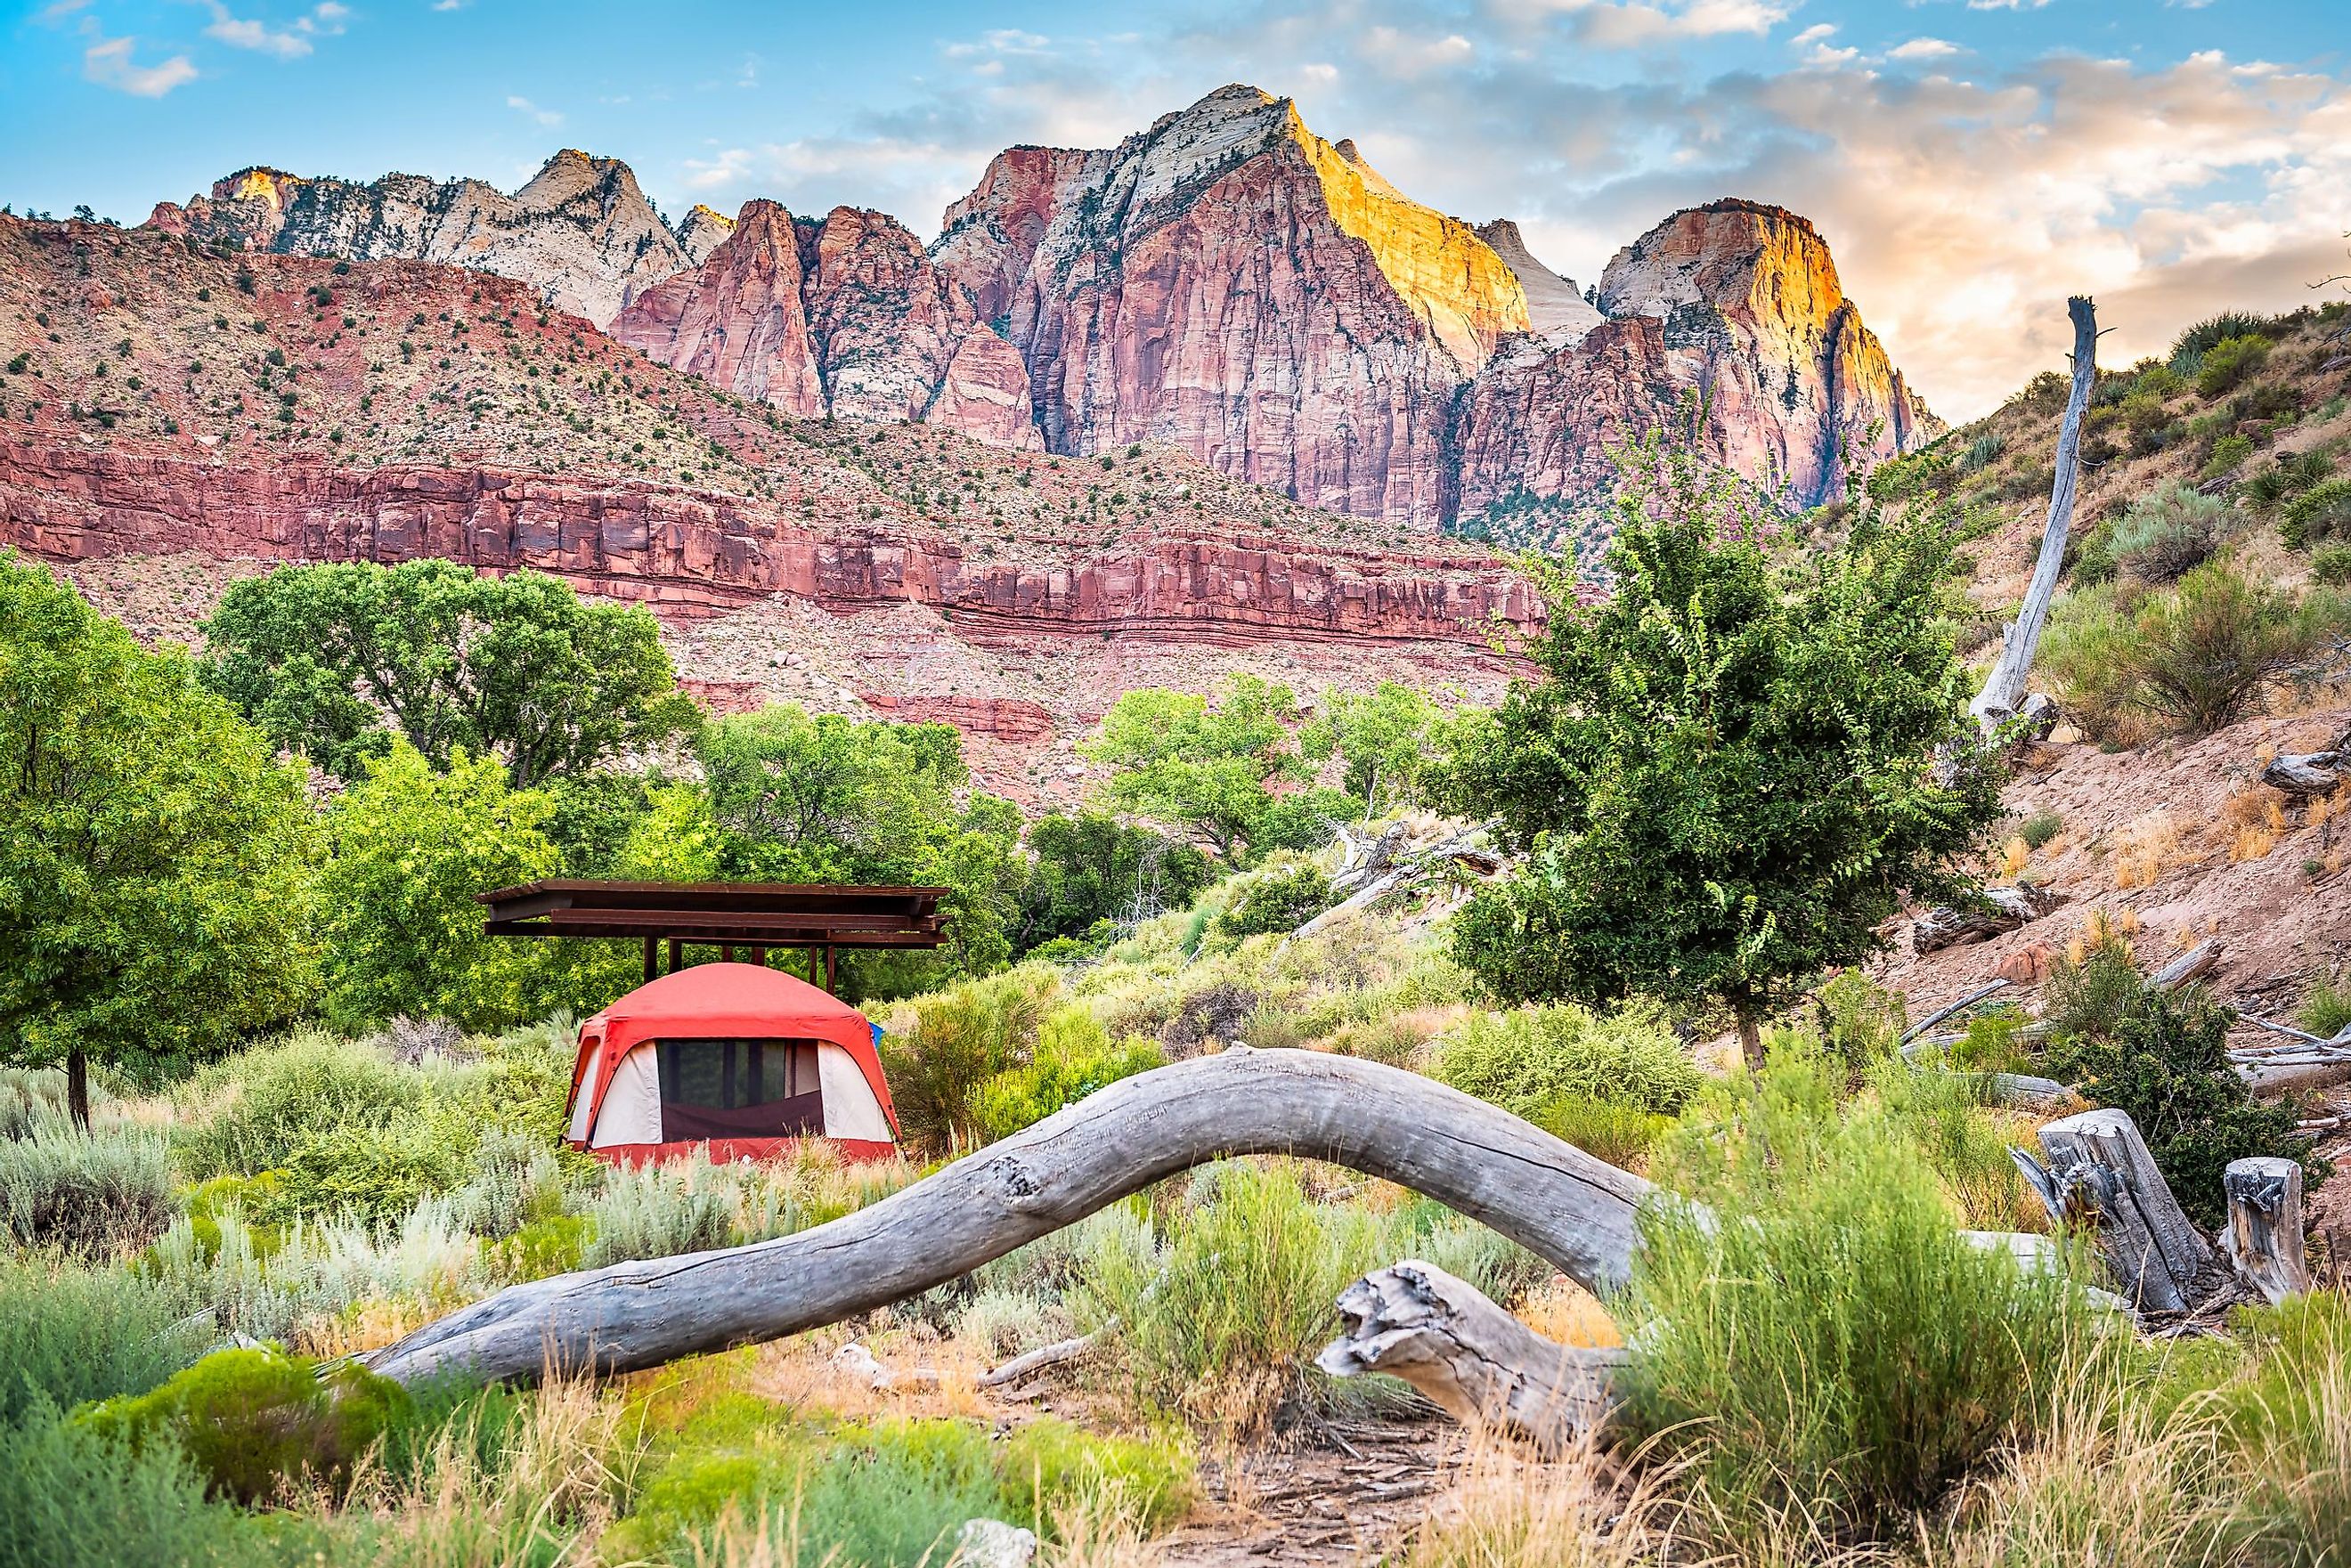 Camping in the Zion National Park